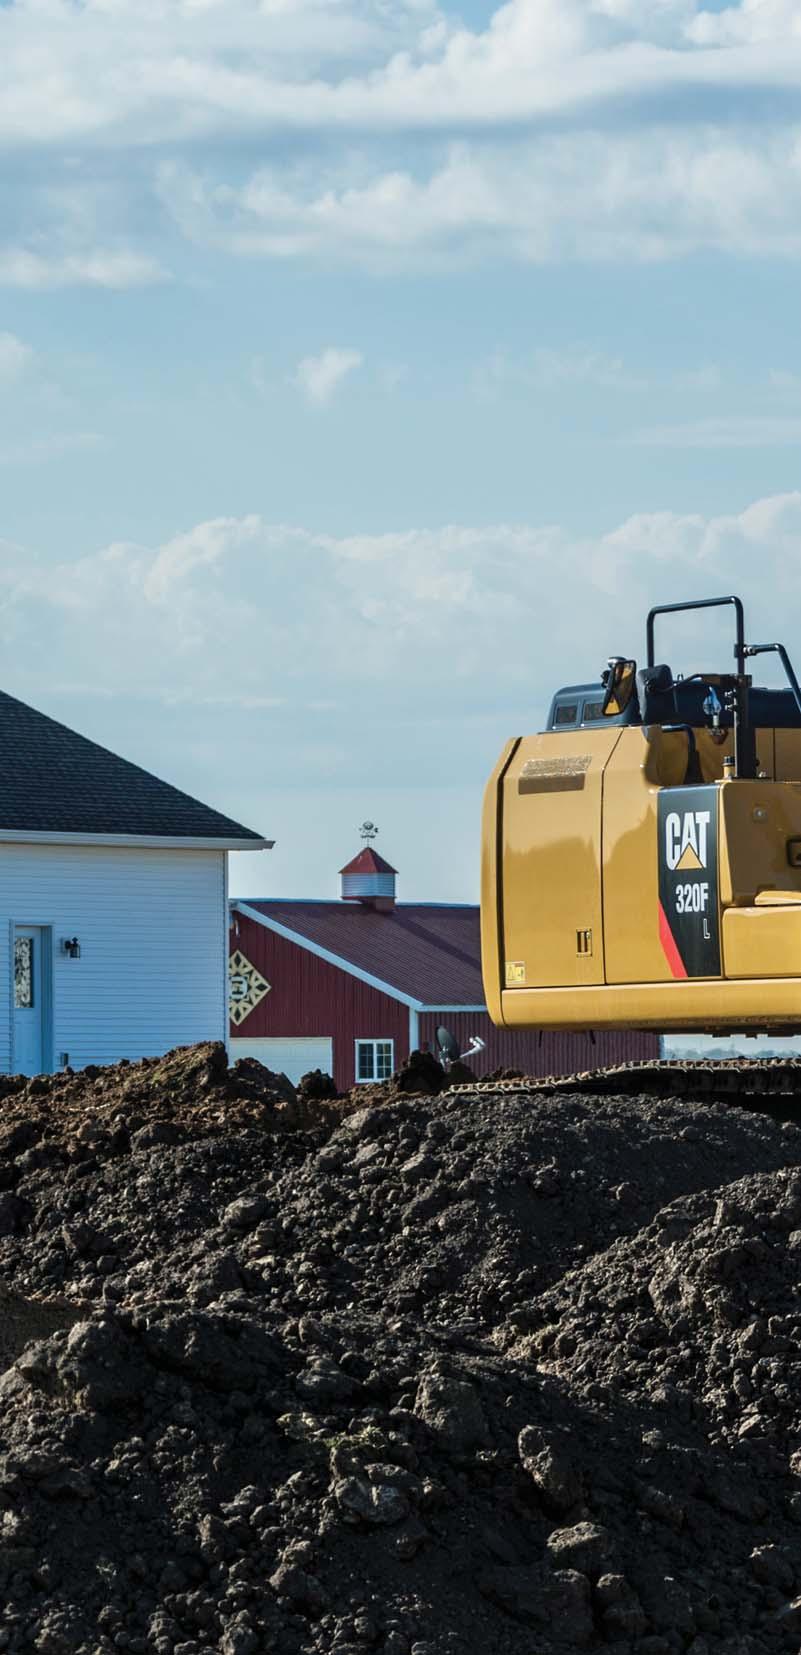 If you are looking for a reliable, durable, low-cost-per-hour excavator to get your work done backed by unmatched support from a brand you can trust look no further than the 320F L.